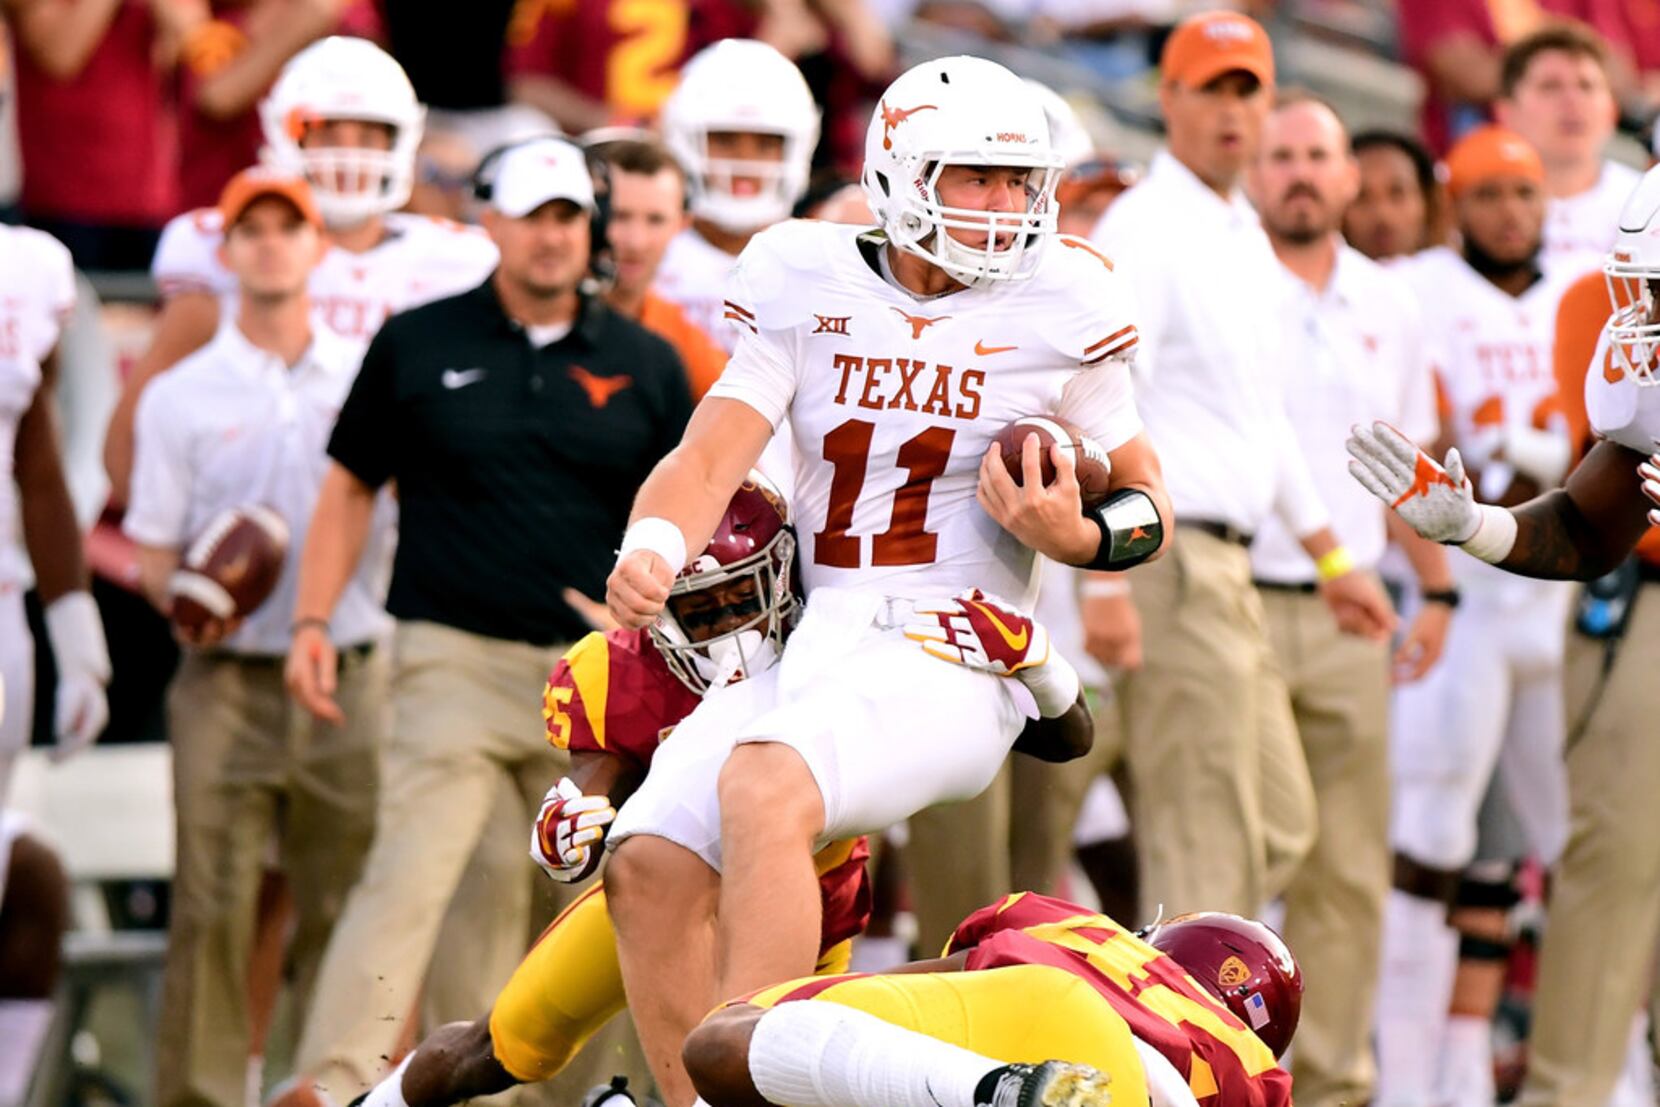 WILLIAMS: Analyzing Iowa State's convincing win over Texas Tech